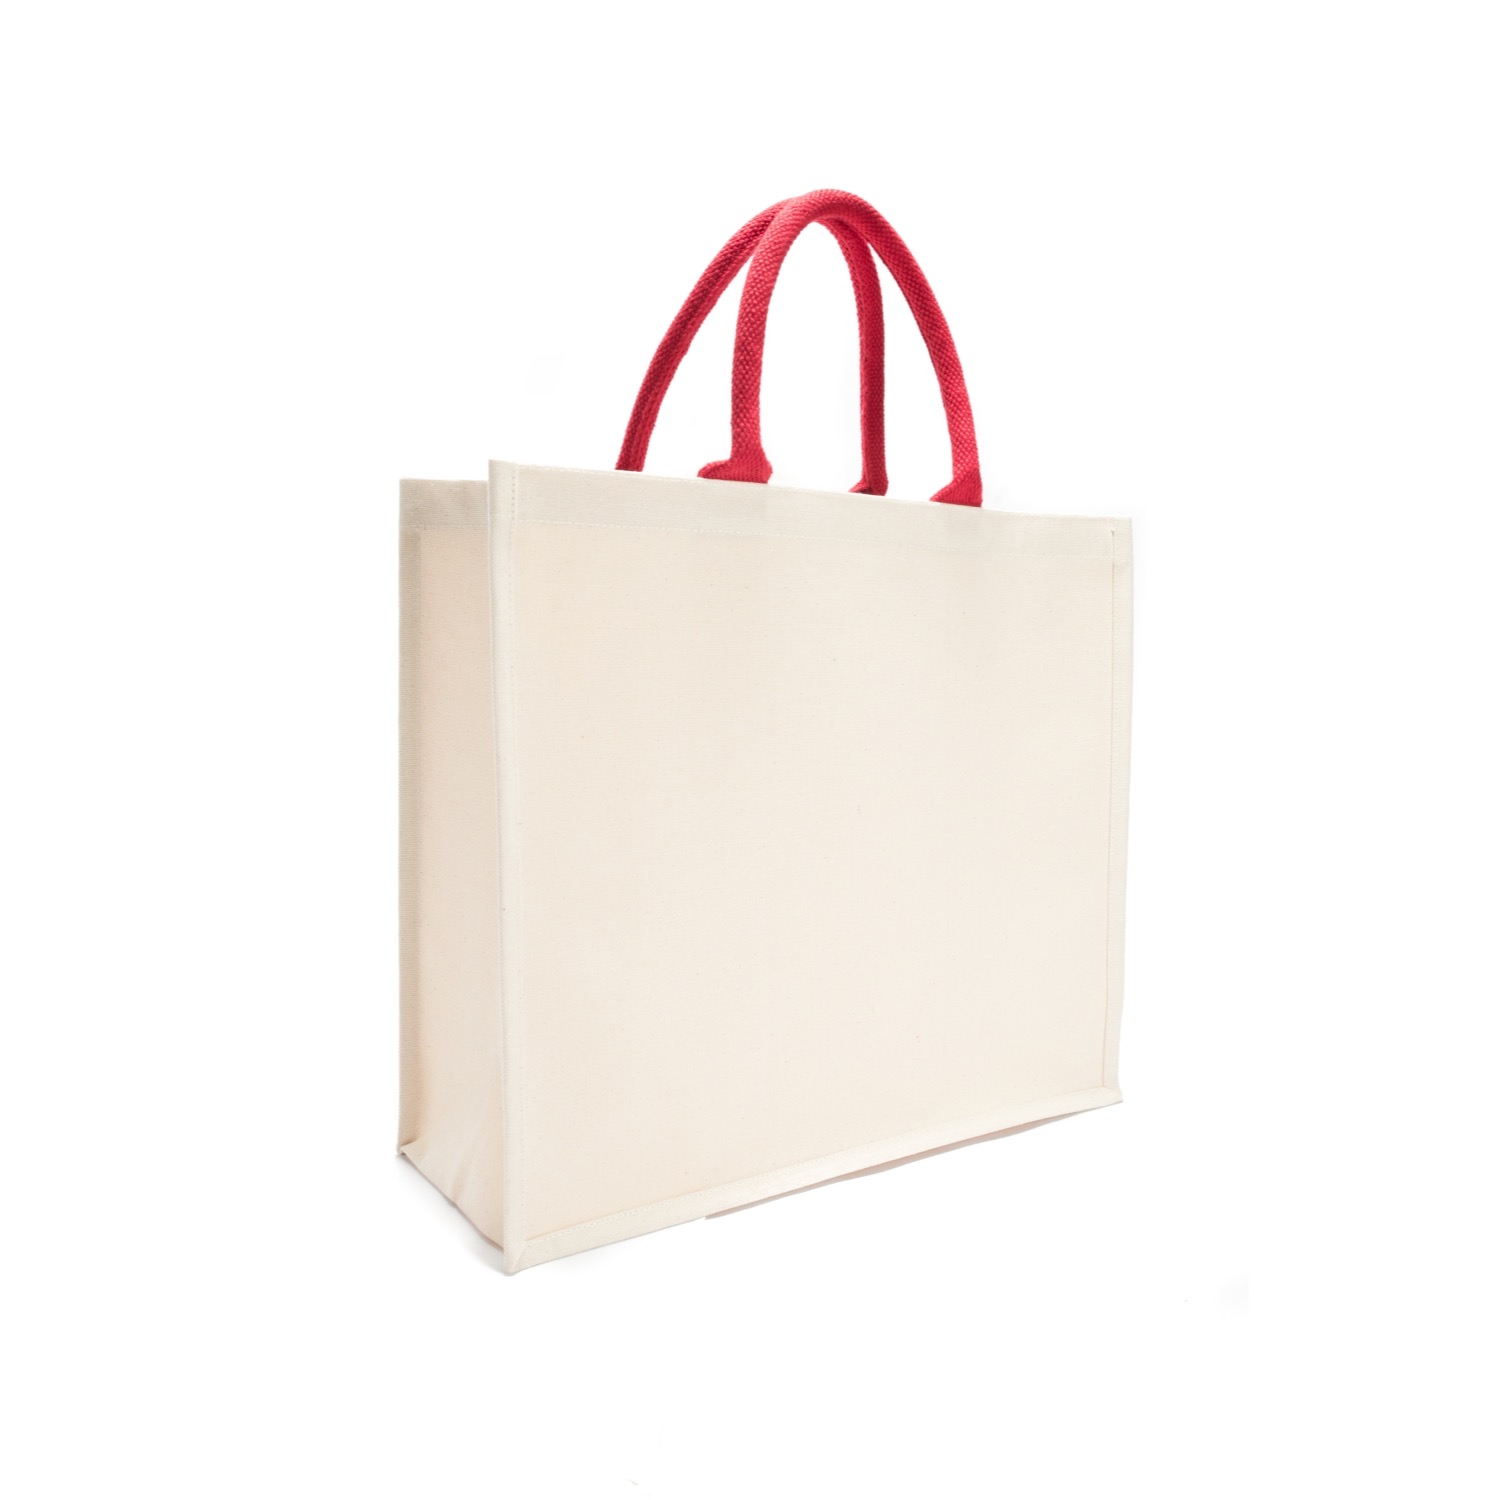 Laminated Canvas Tote Bag Guide